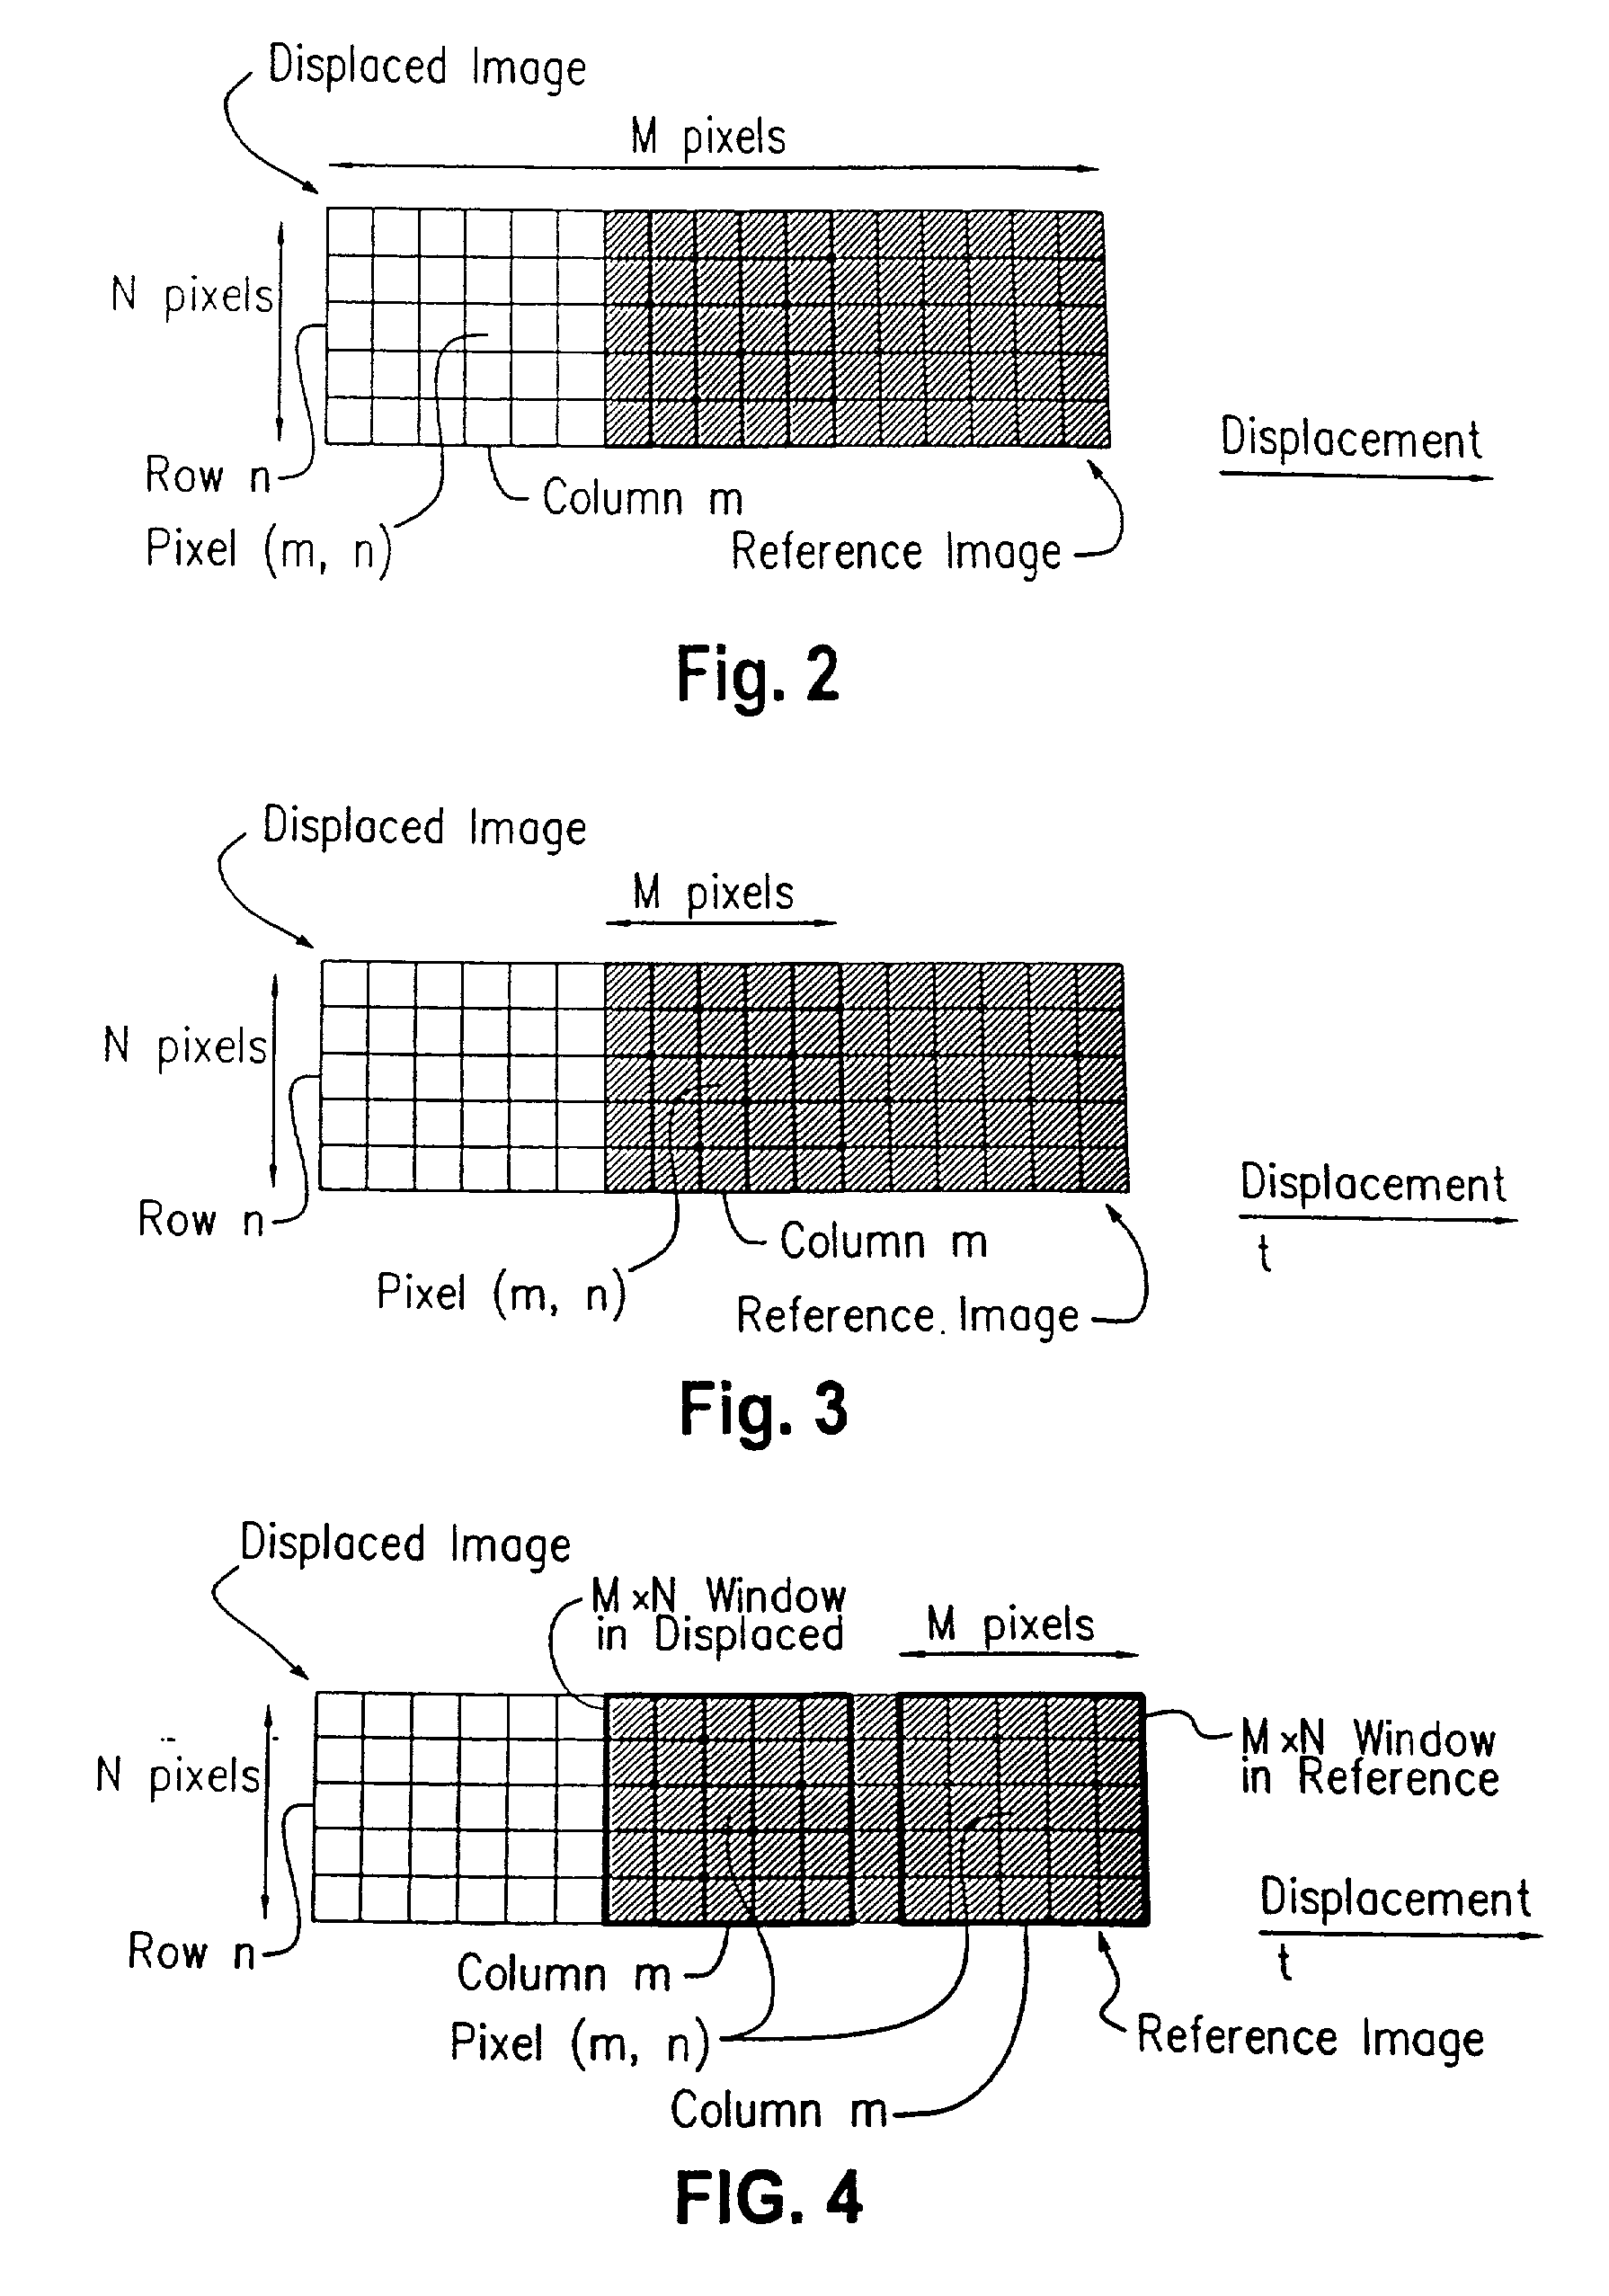 Systems and methods for reducing position errors in image correlation systems during intra-reference-image displacements